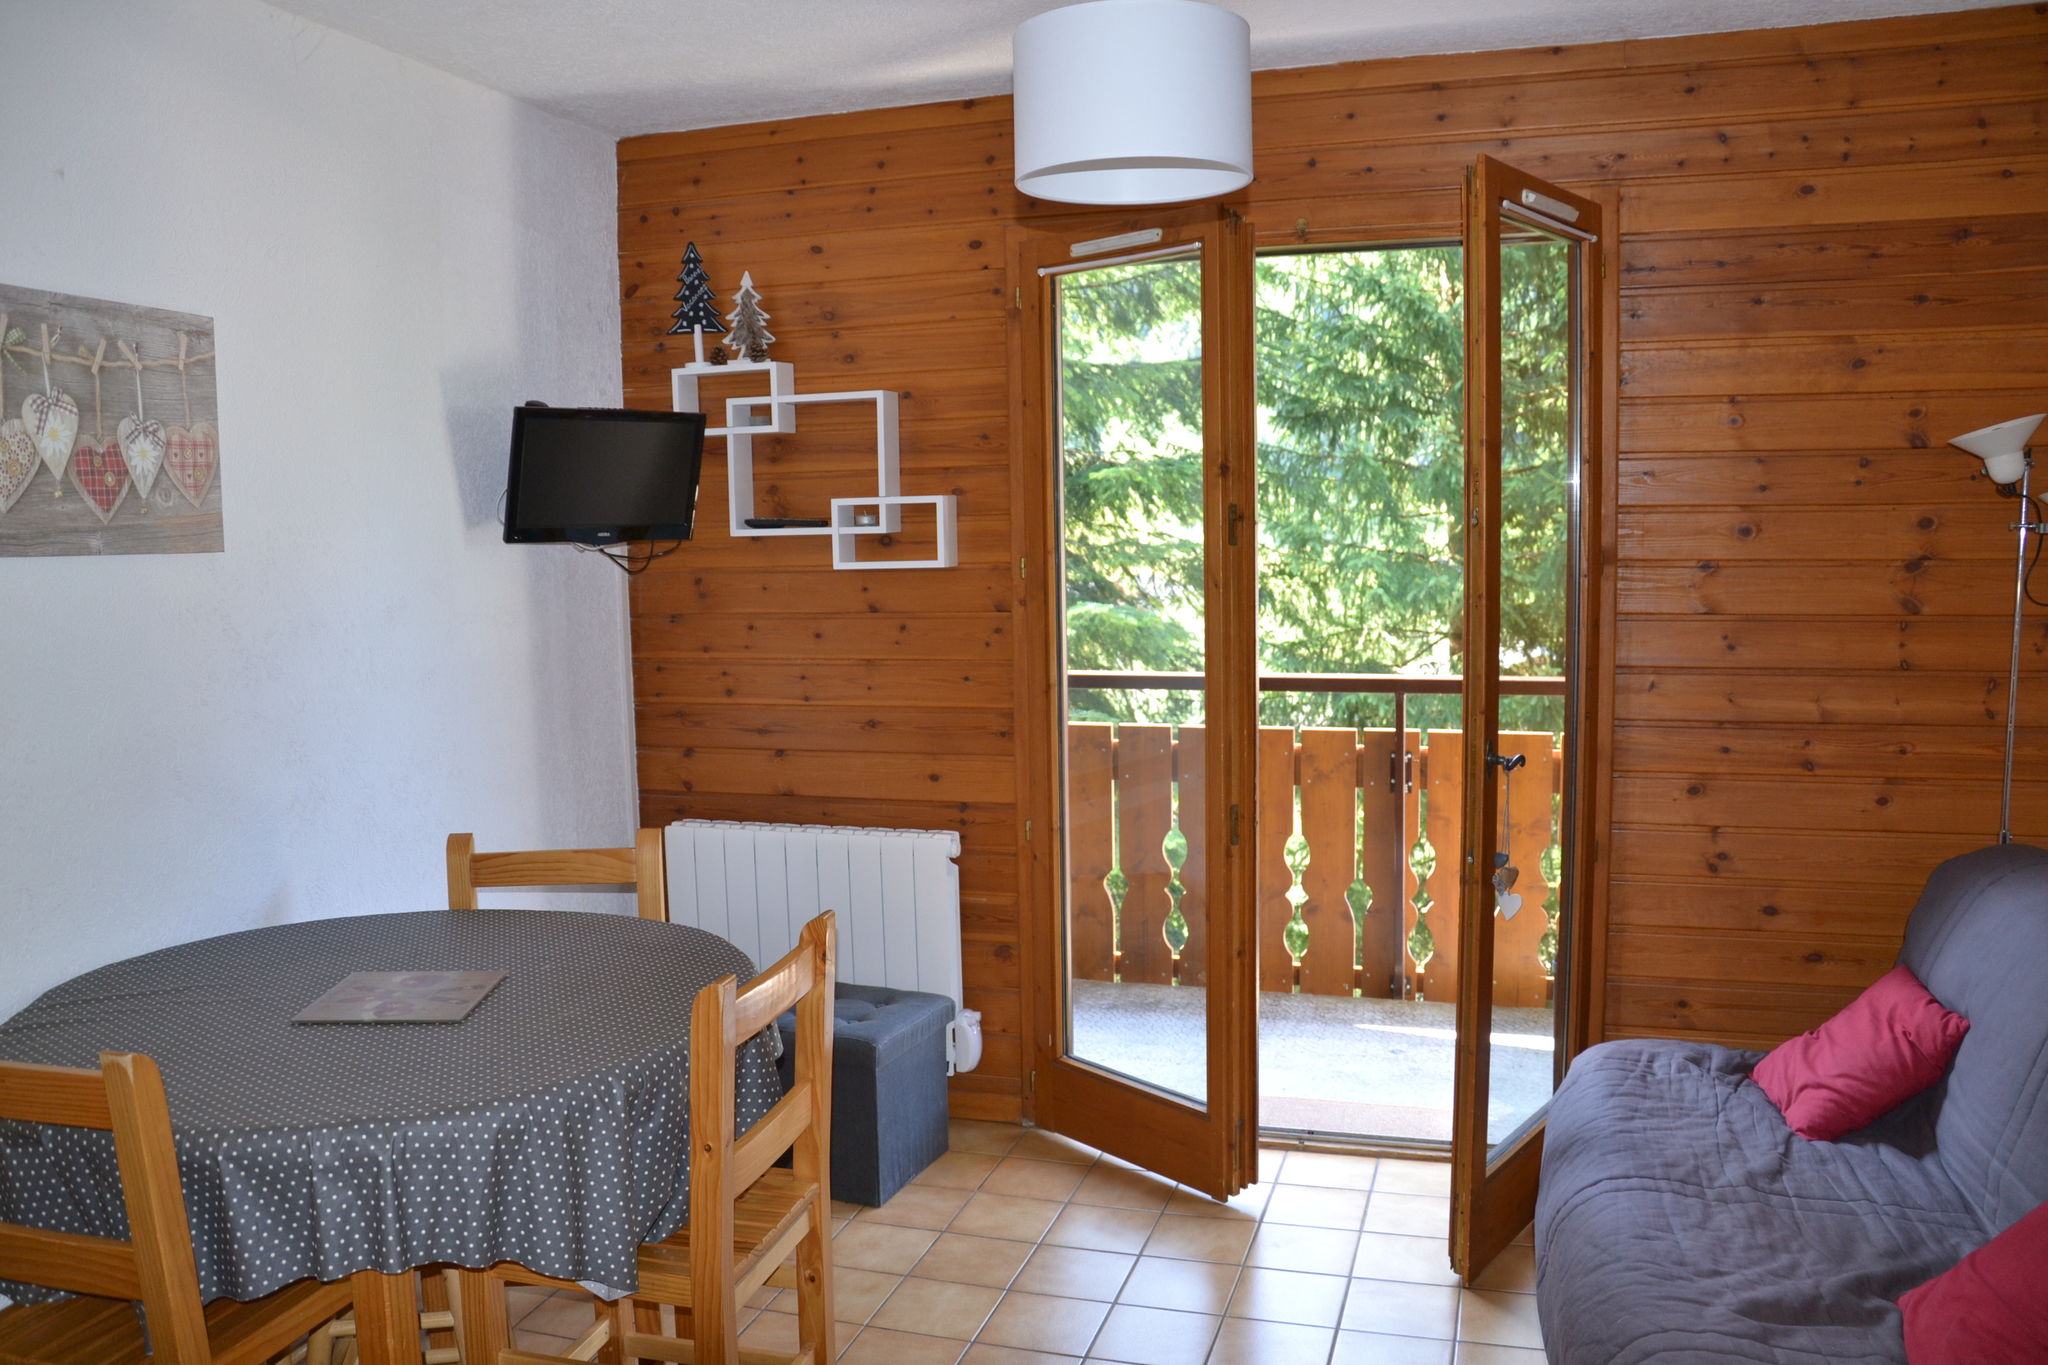 Apartment with balcony located near the ski lifts